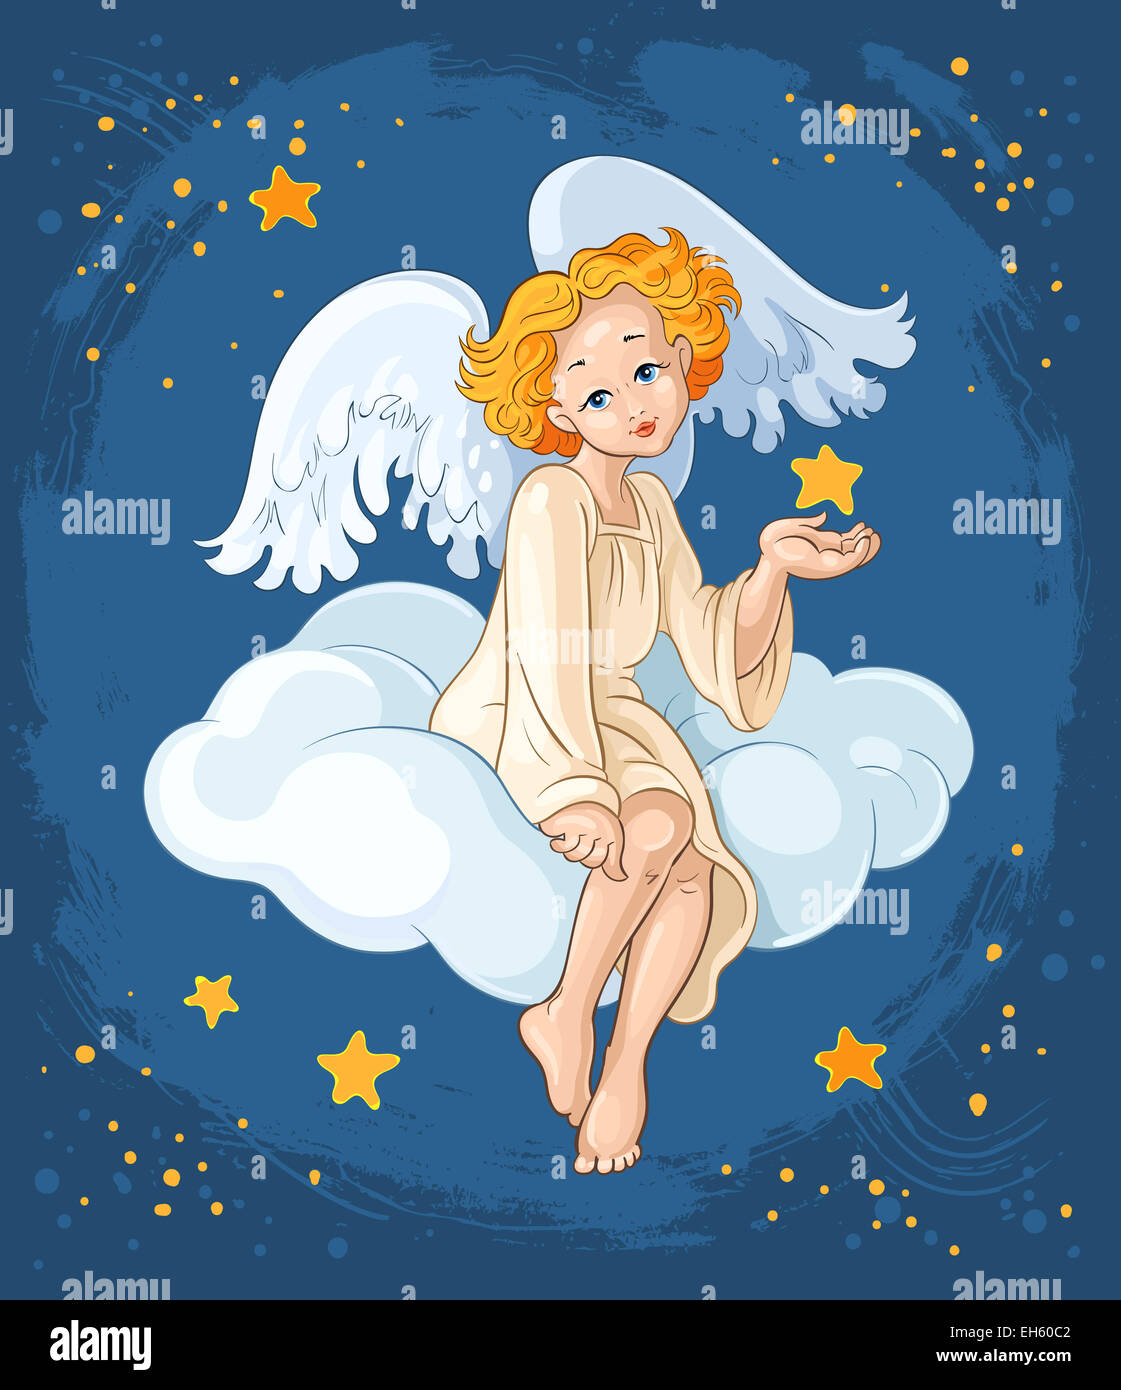 Cute angel girl with star sitting on a cloud Stock Photo